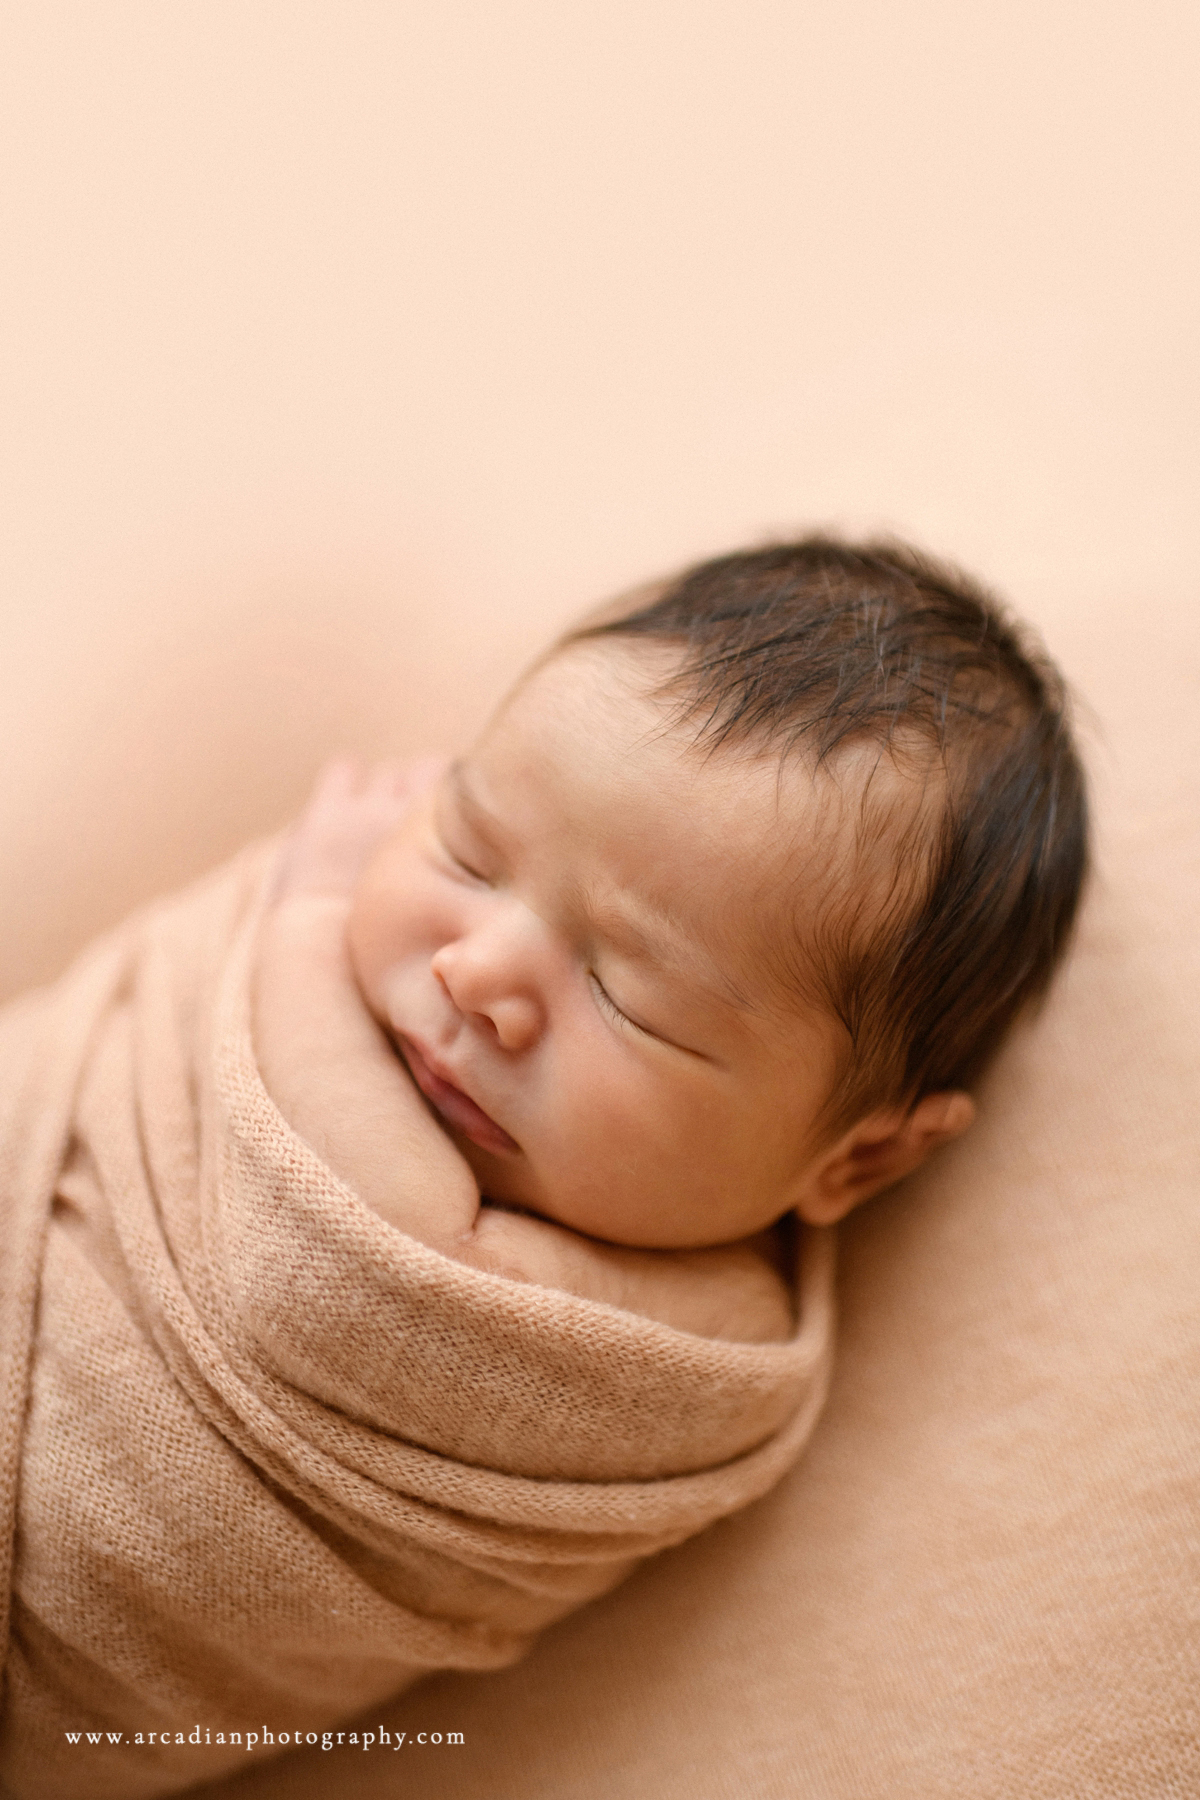 Snug as a bug - learn more about booking newborn photos.